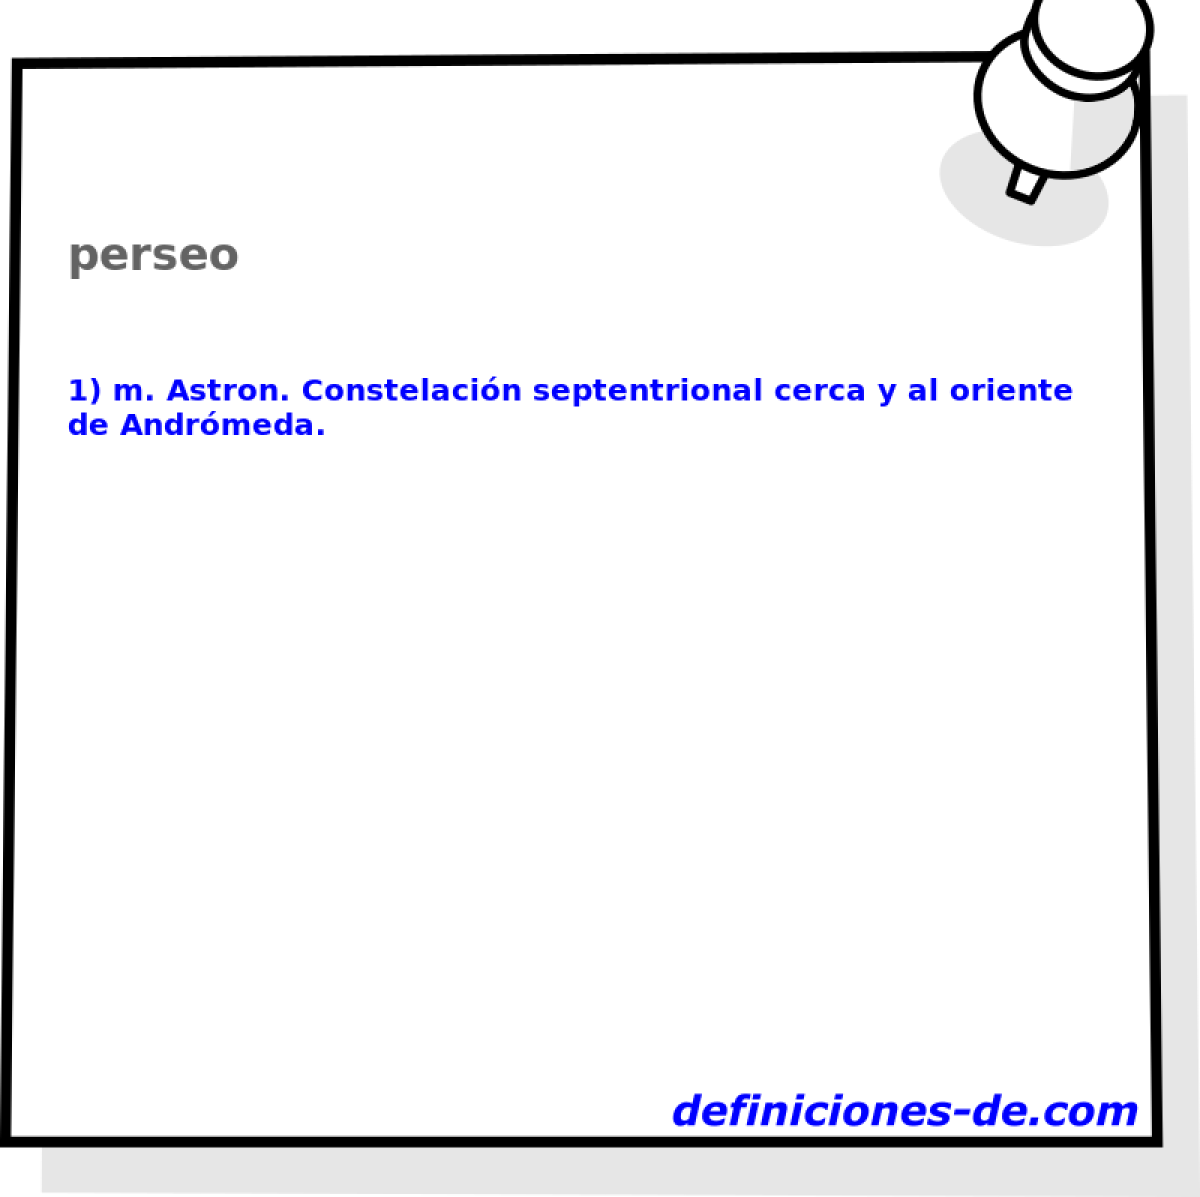 perseo 